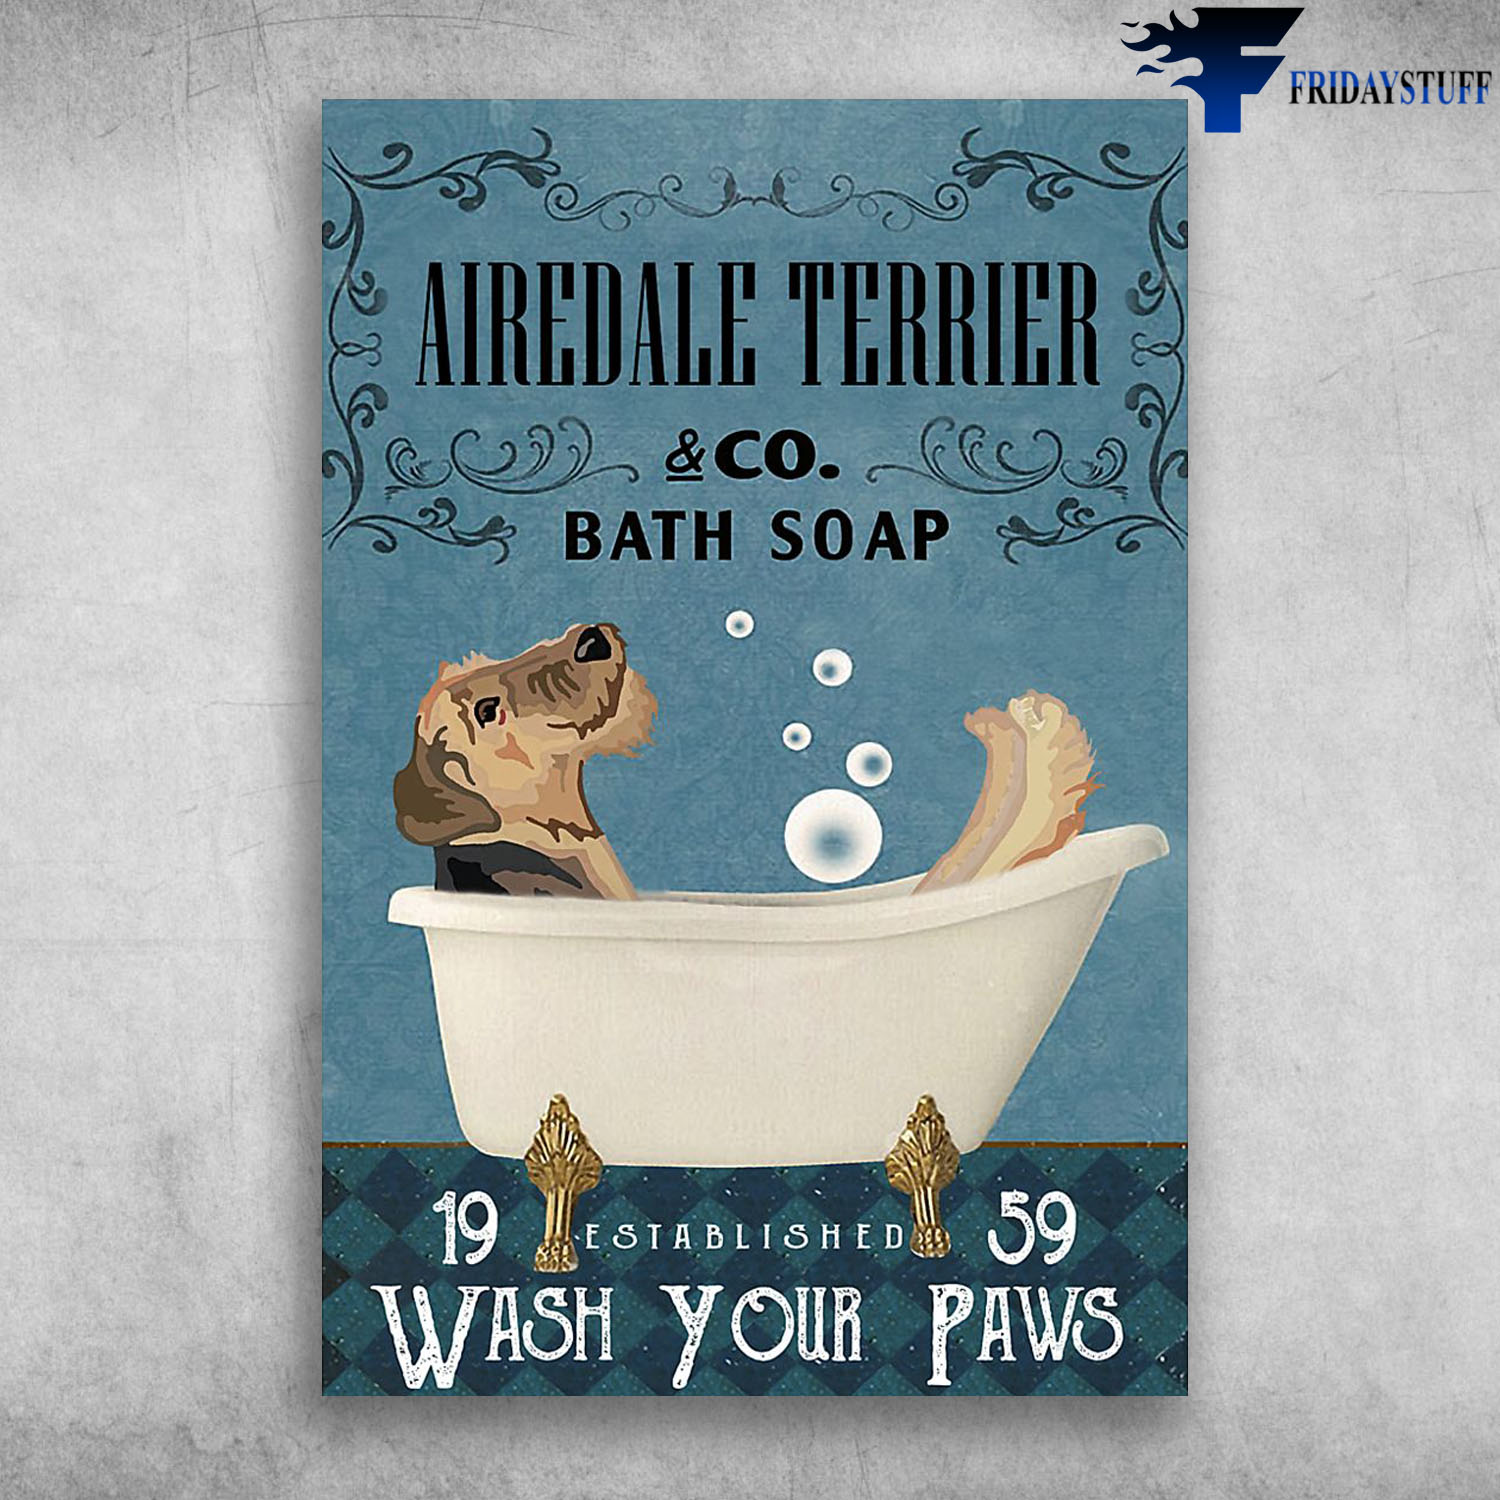 Airedale Terrier In Bathtub Bath Soap Established Wash Your Paws